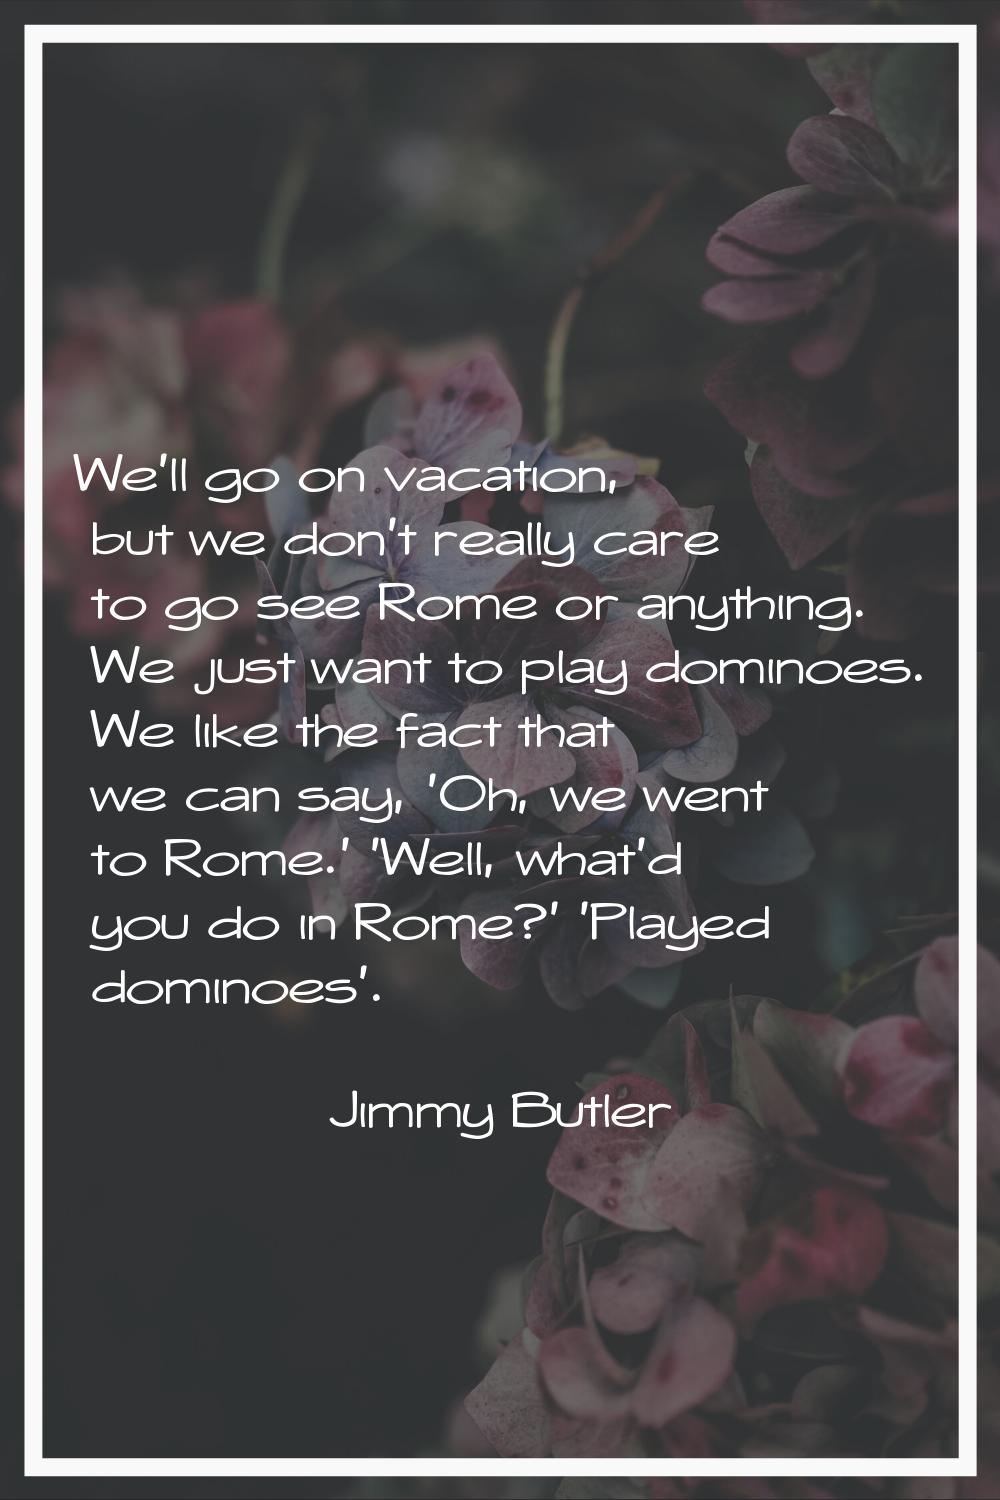 We'll go on vacation, but we don't really care to go see Rome or anything. We just want to play dom